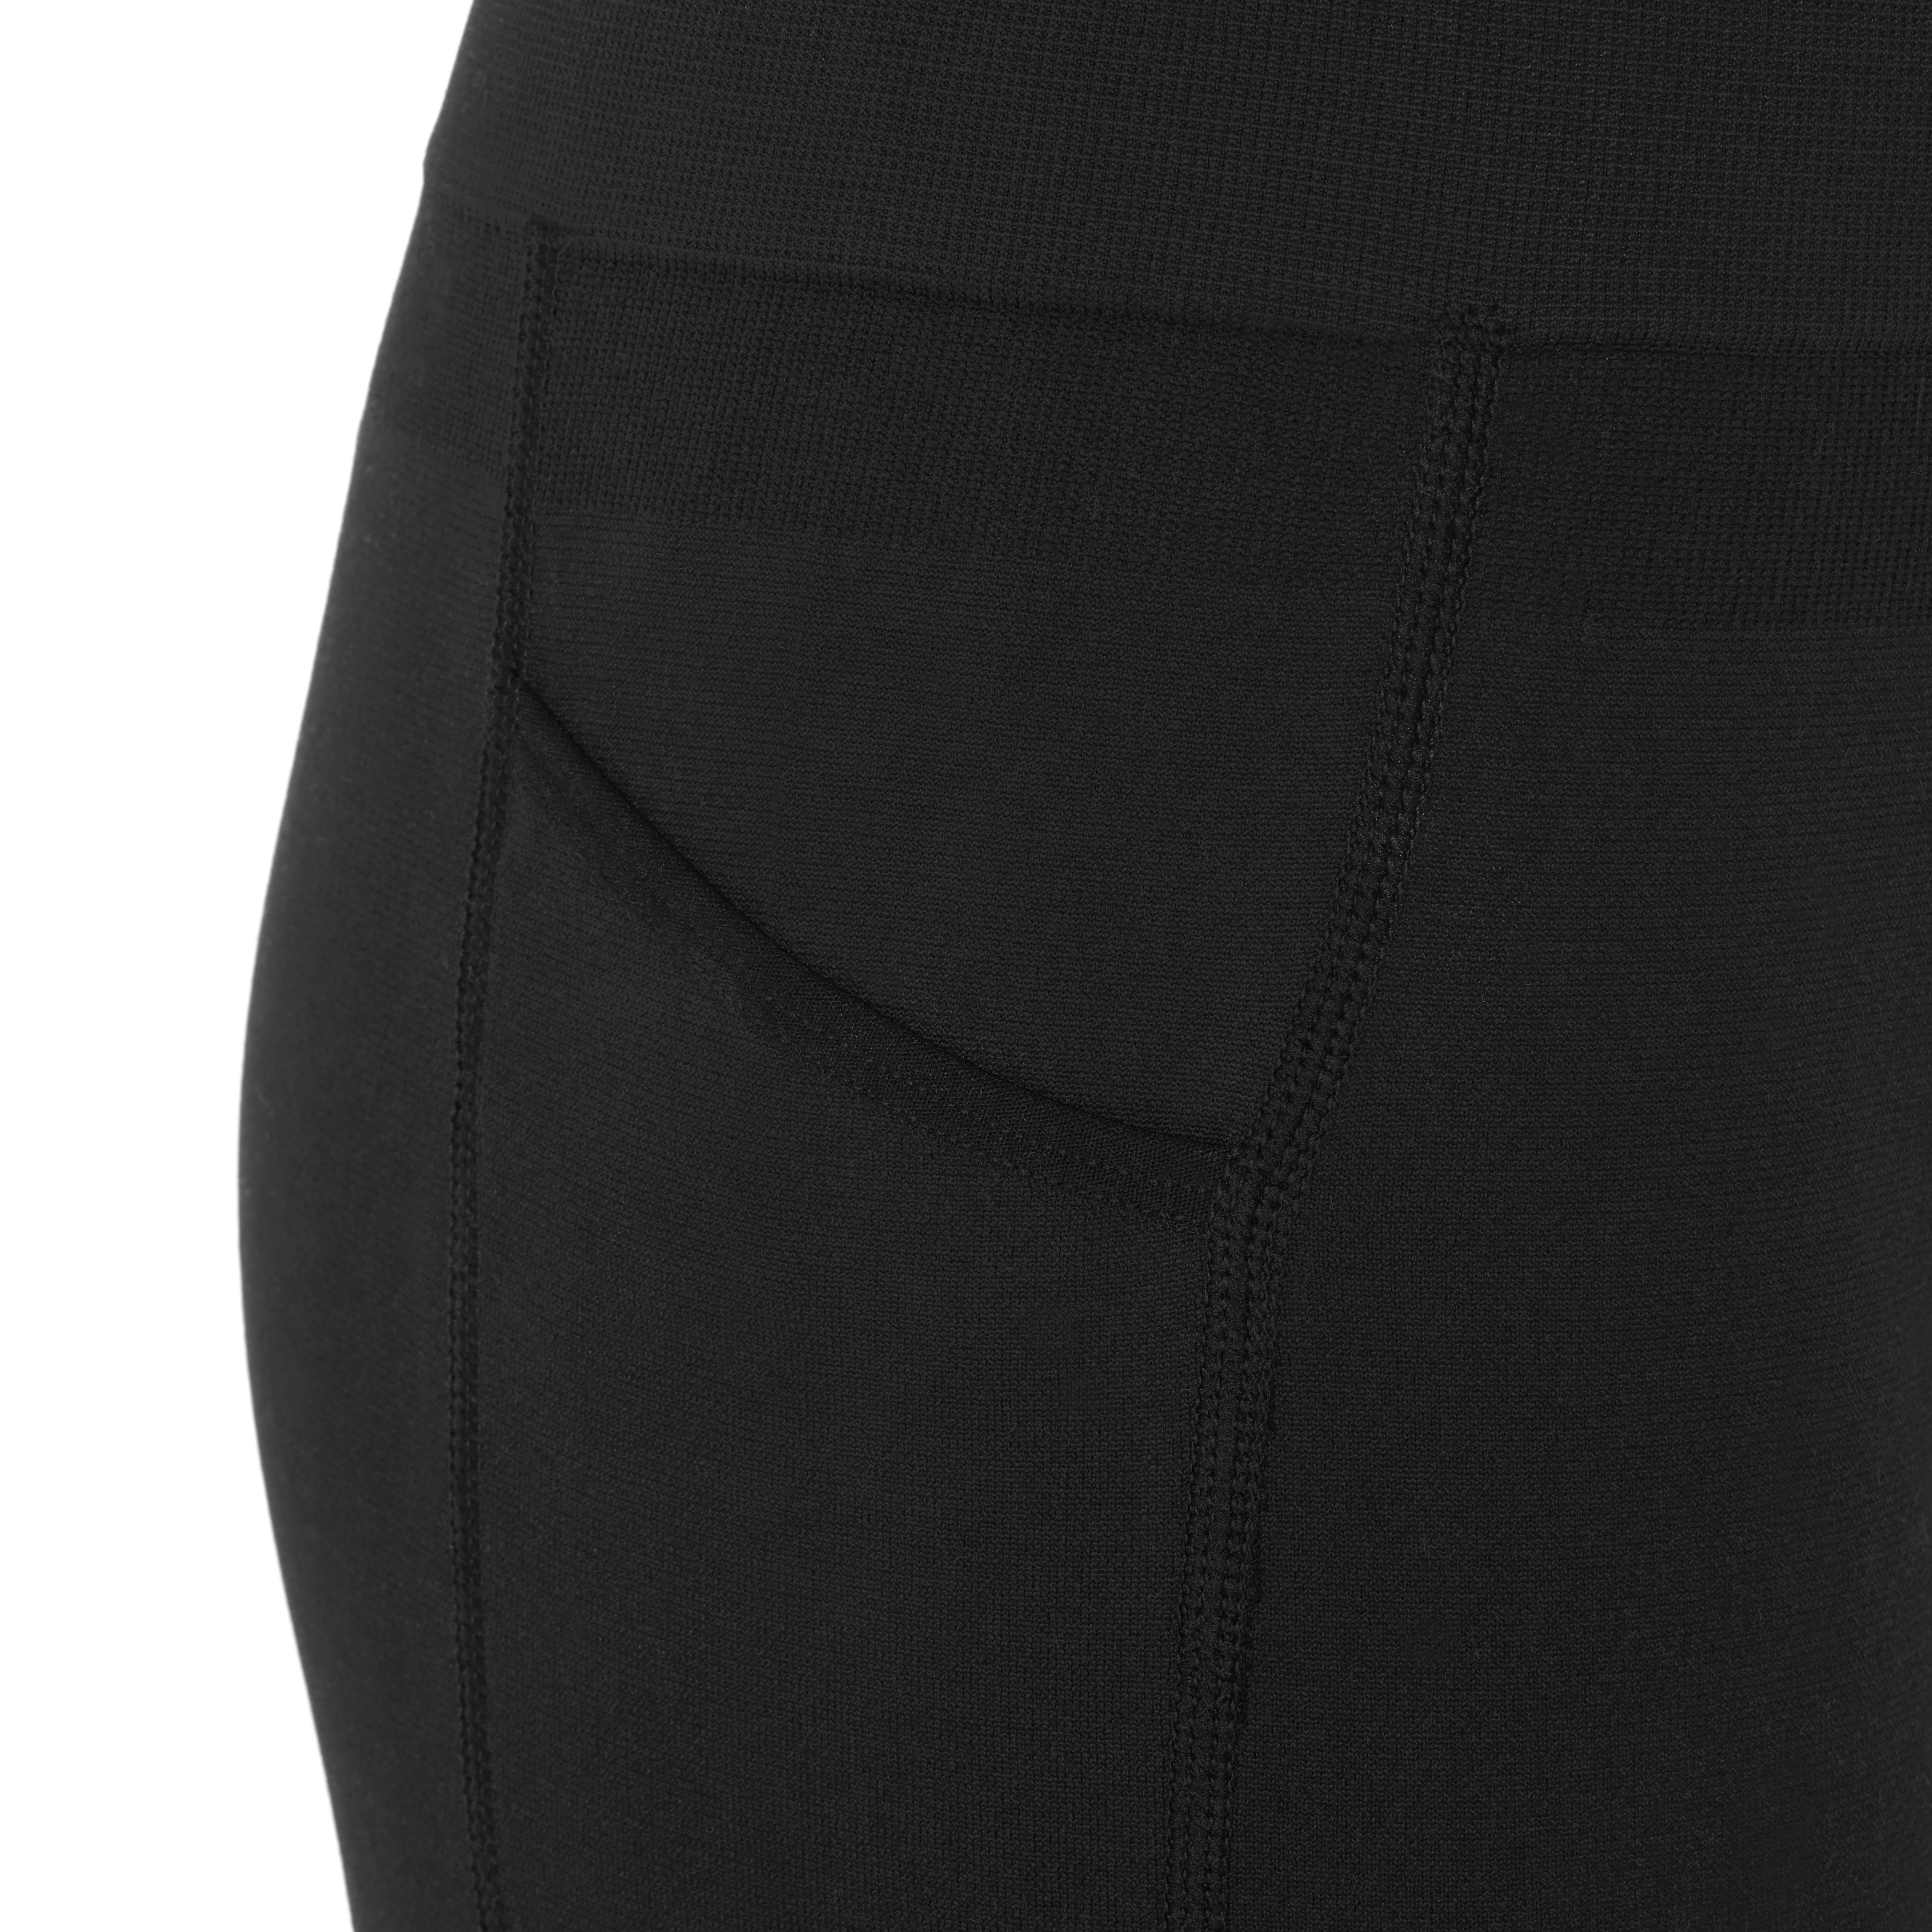 Women's Cross Waist Workout Shorts Tummy Control Spandex Athletic Biker  Shorts with Deep Pockets White at  Women's Clothing store